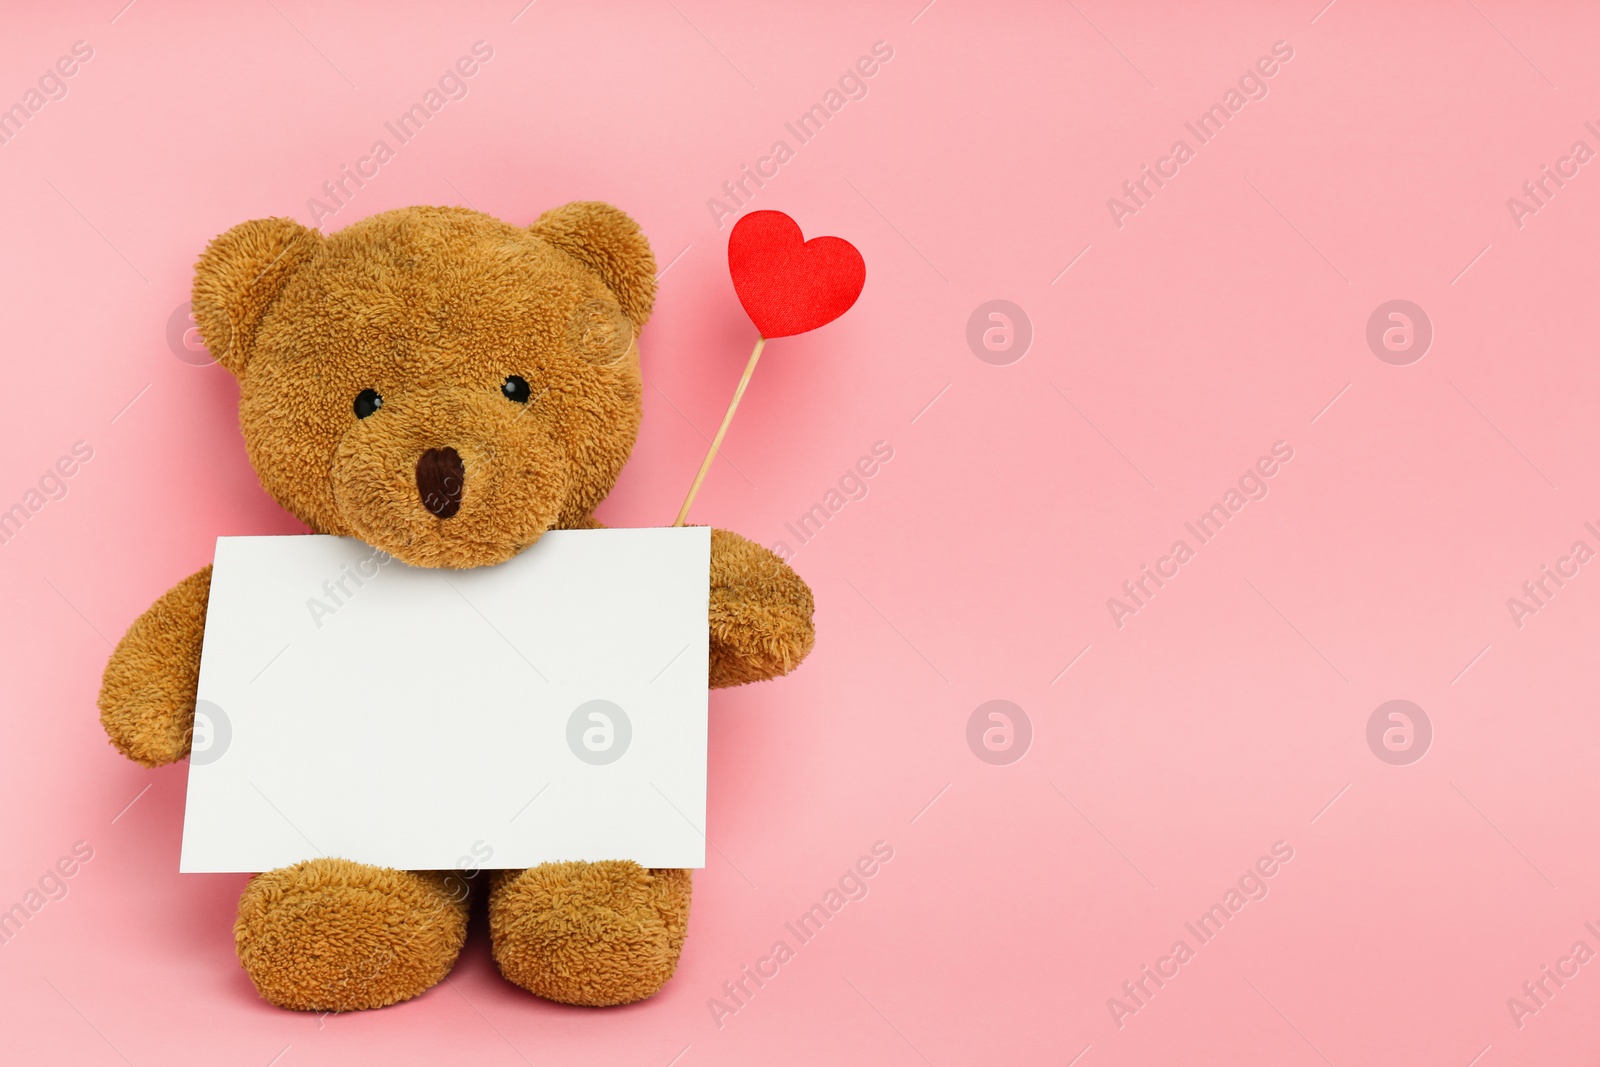 Photo of Cute teddy bear with red heart and blank card on pink background, space for text. Valentine's day celebration